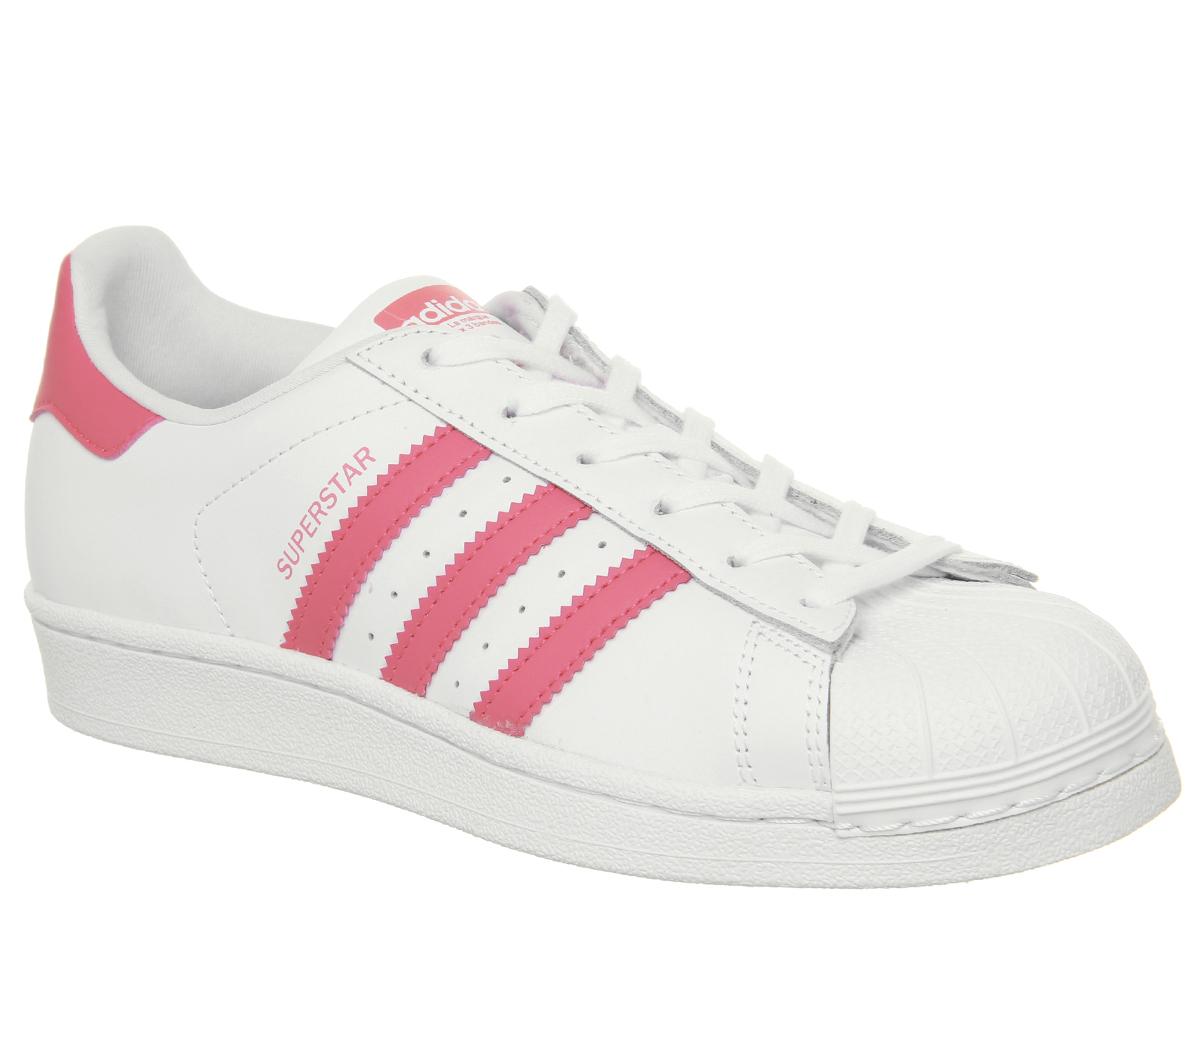 adidas superstar pink and white